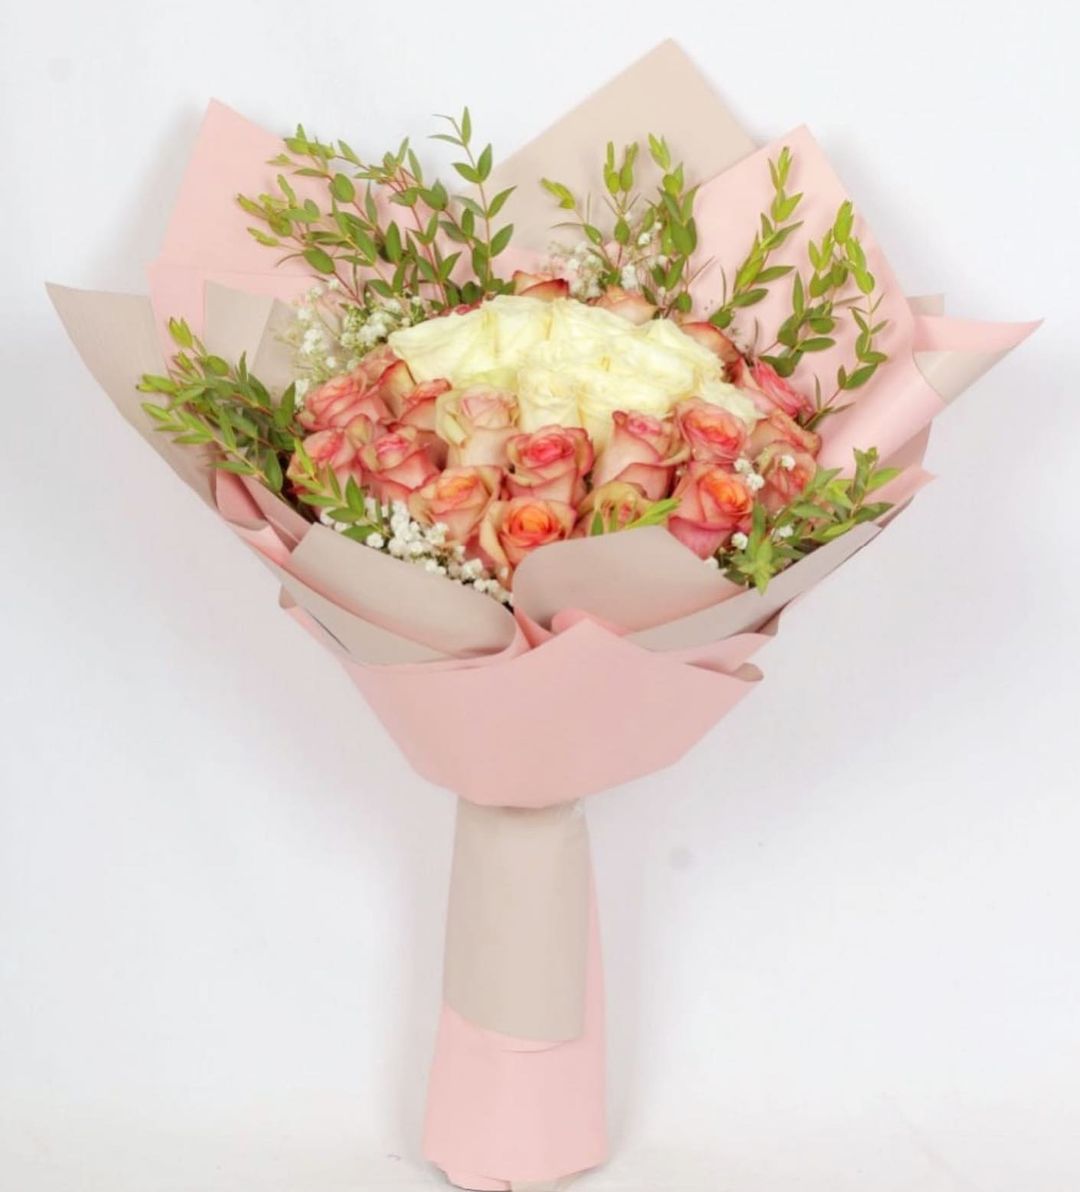 Bouquet of peach and white roses